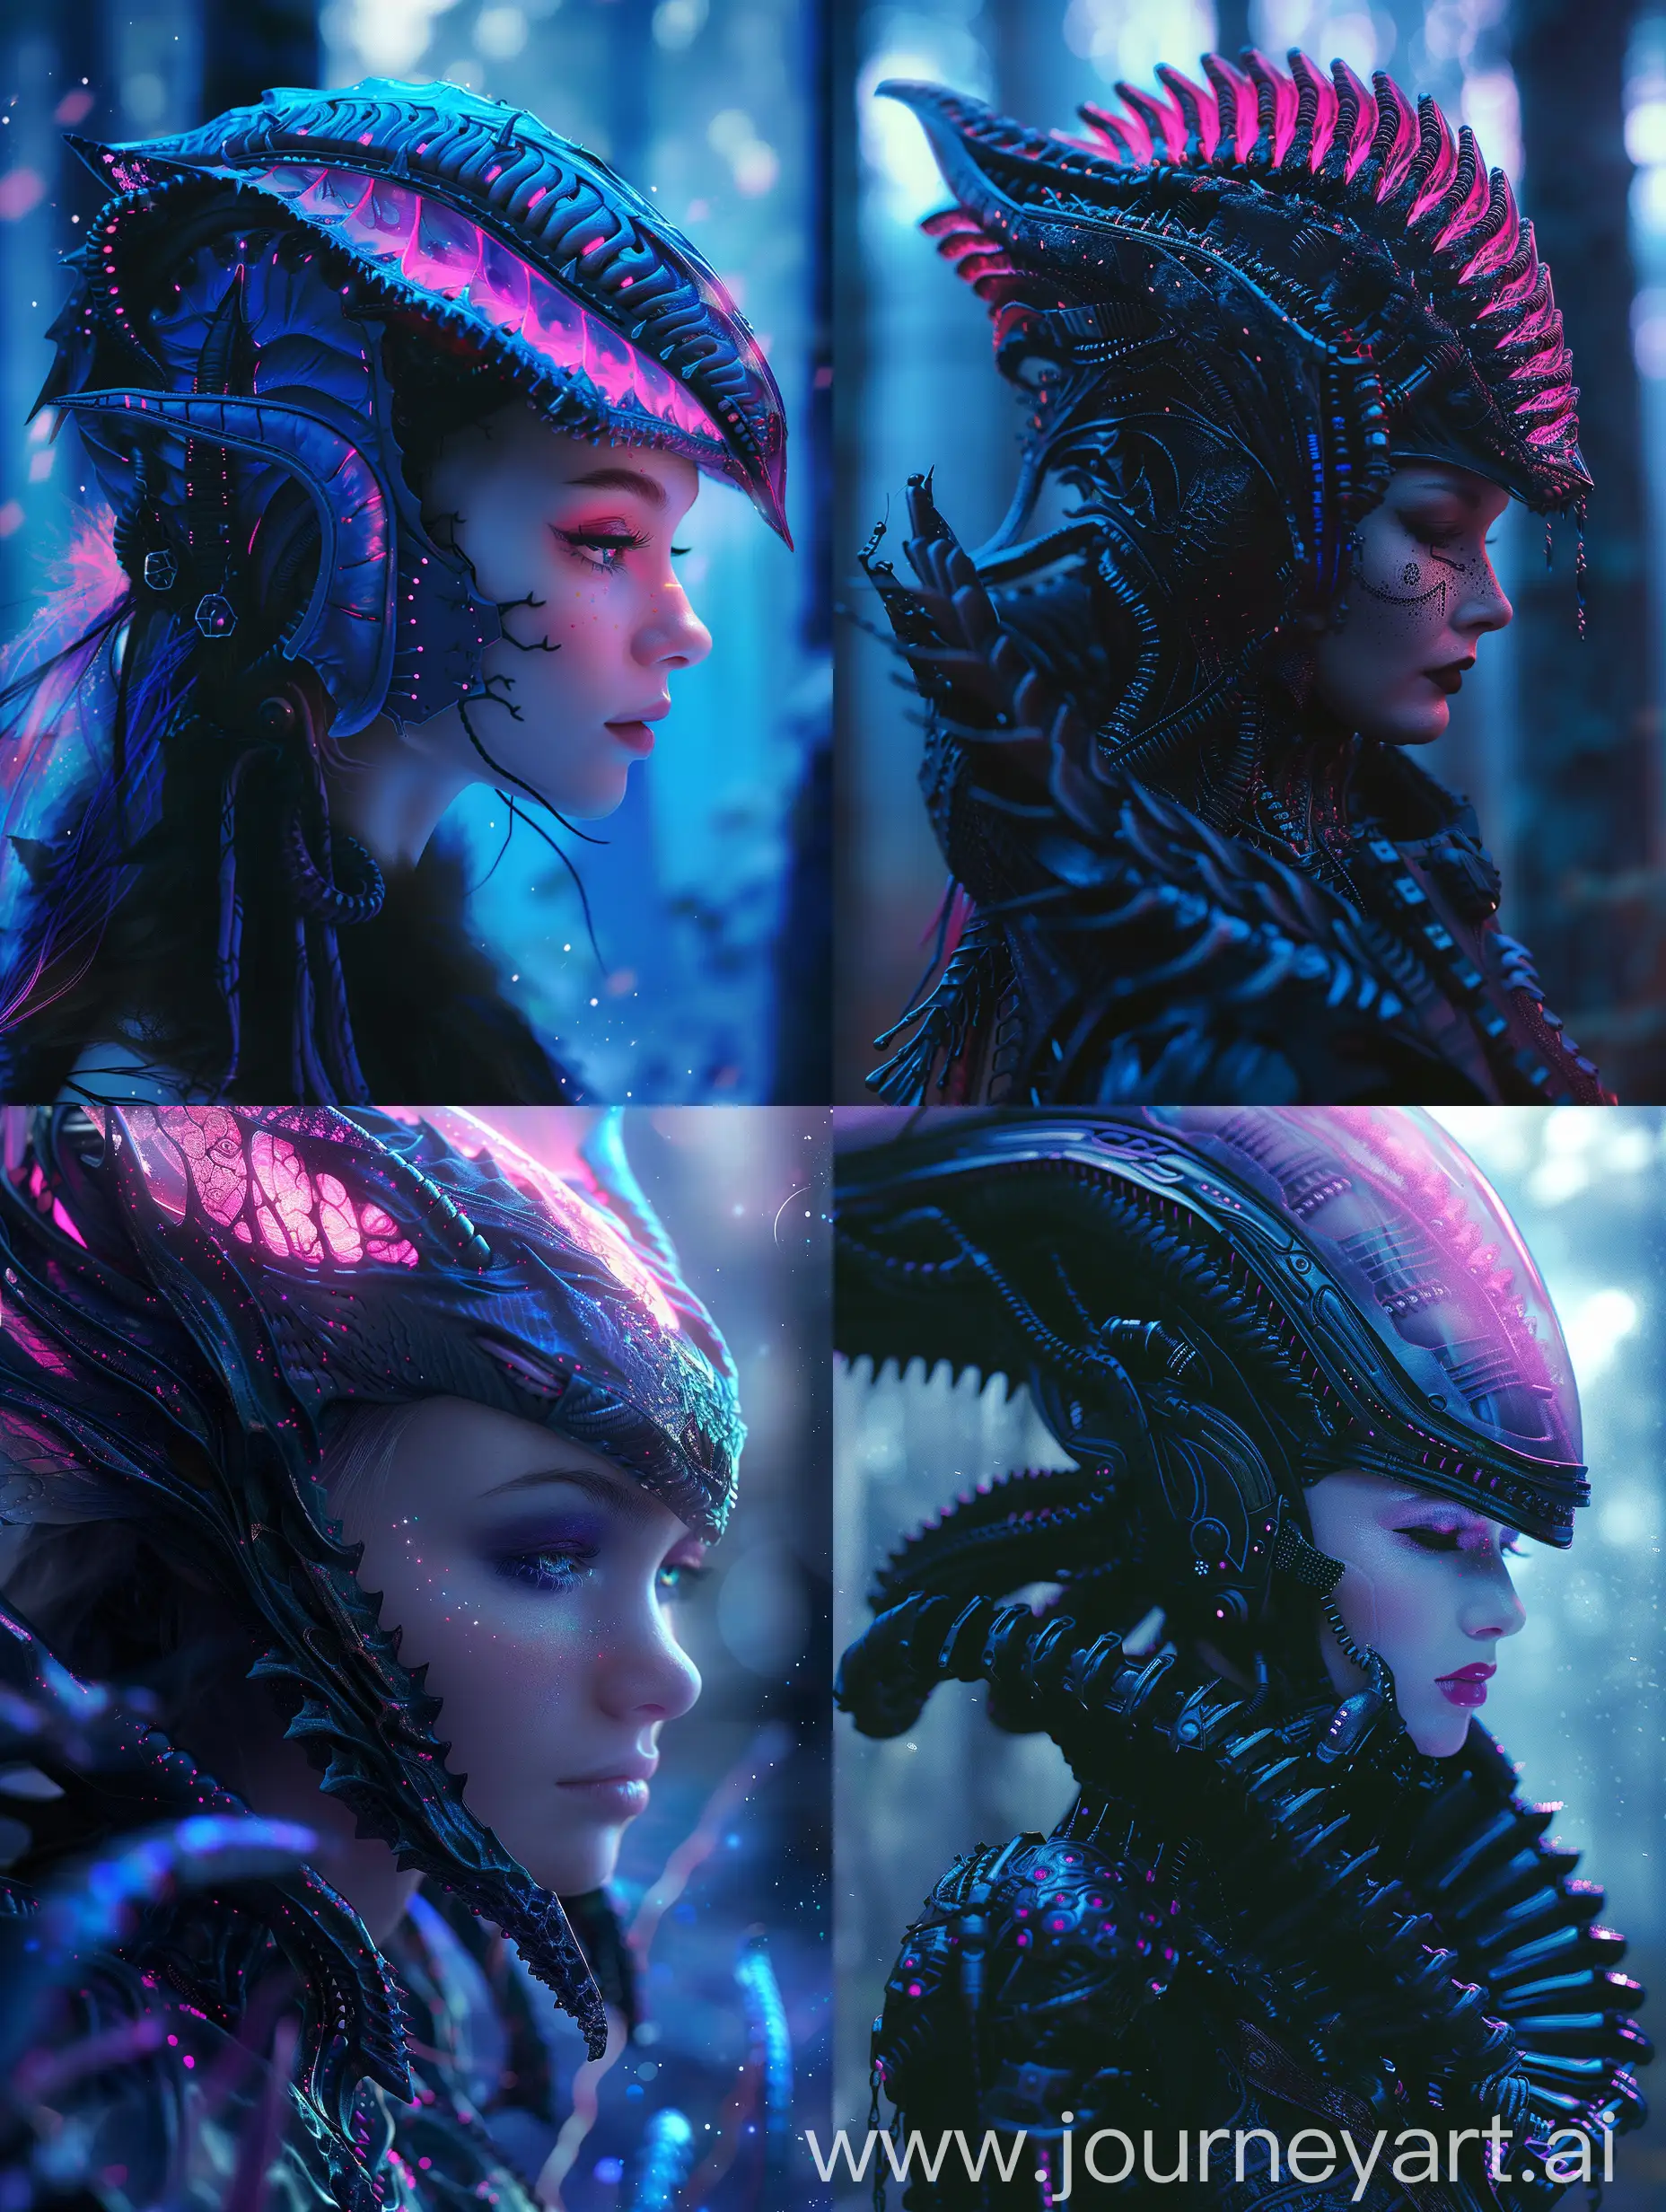 Elf, fairy, beautiful, darkness, potrait, realistic, high detail, ultra quality, with subtle pink and blue gradients, xenomorph, cyborg, Moonlight enveloping attire forest.